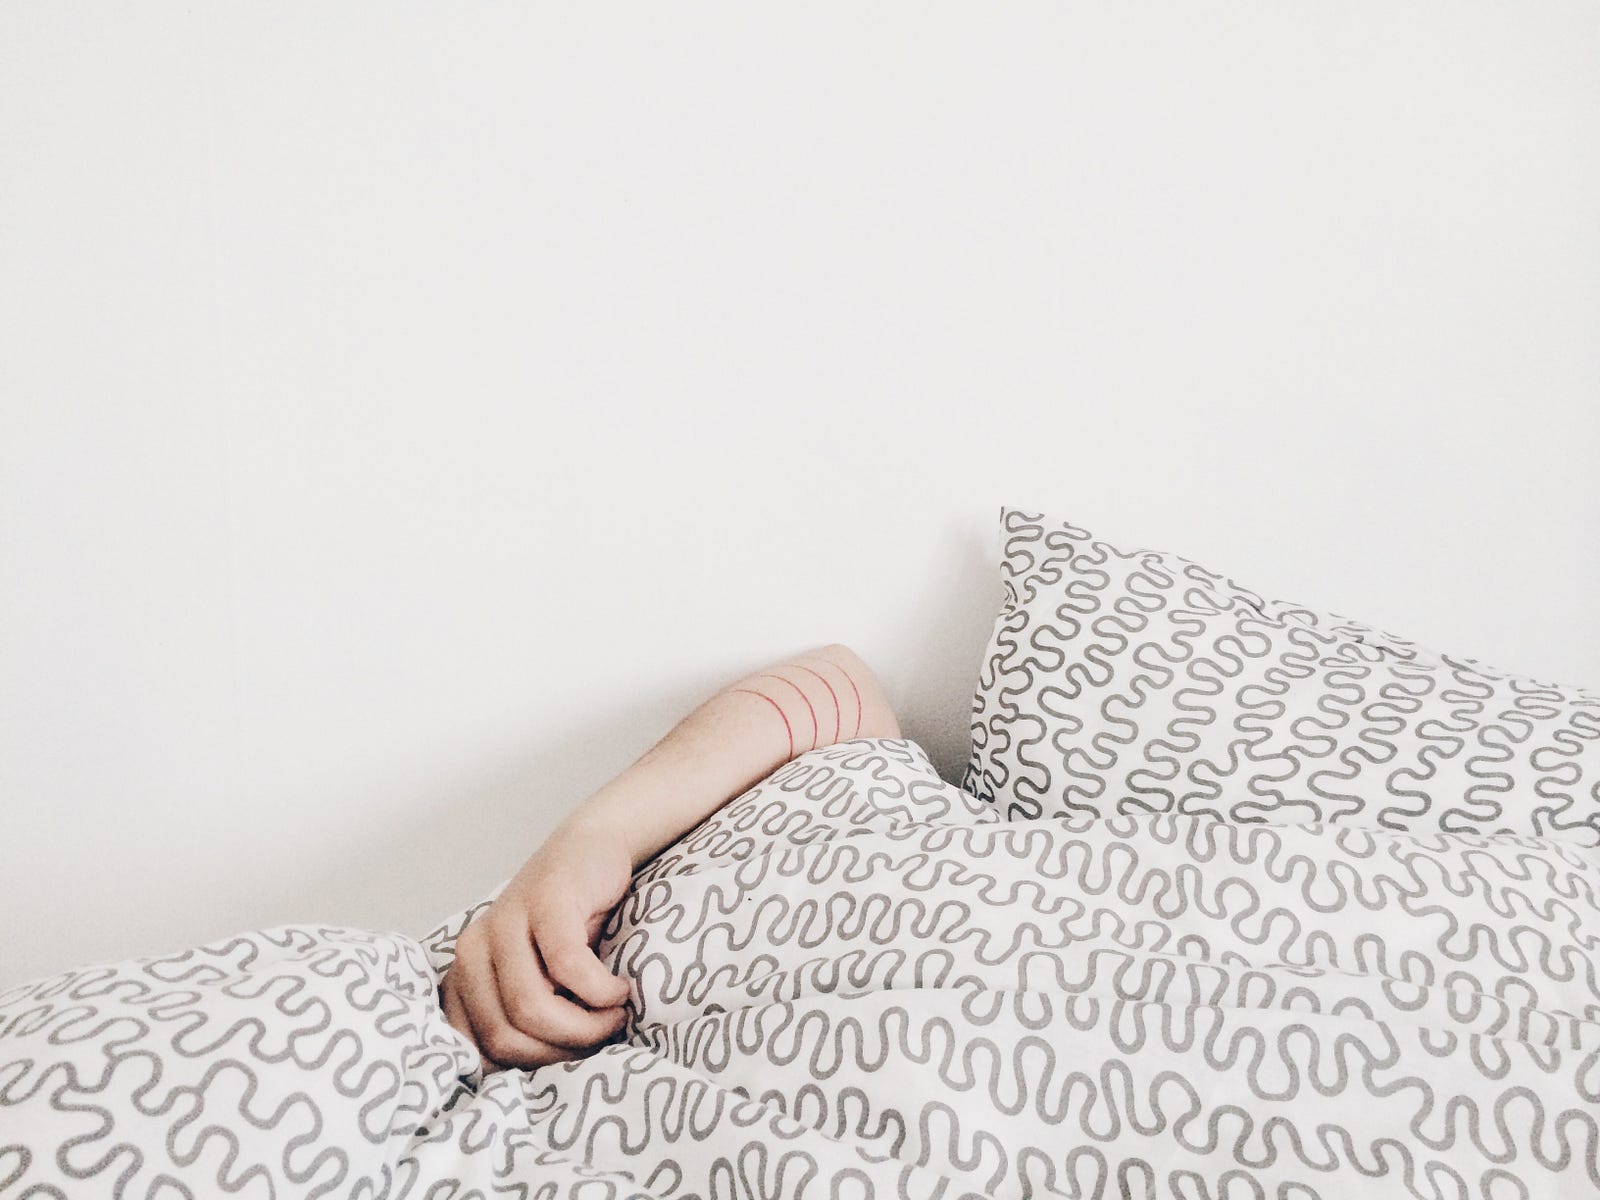 An arm wraps over a bed comforter. The person is otherwise not visible. While some studies have suggested an association between excessive daytime sleepiness or long naps and an increased risk of cardiovascular problems, the precise mechanisms and causality are not yet fully understood.